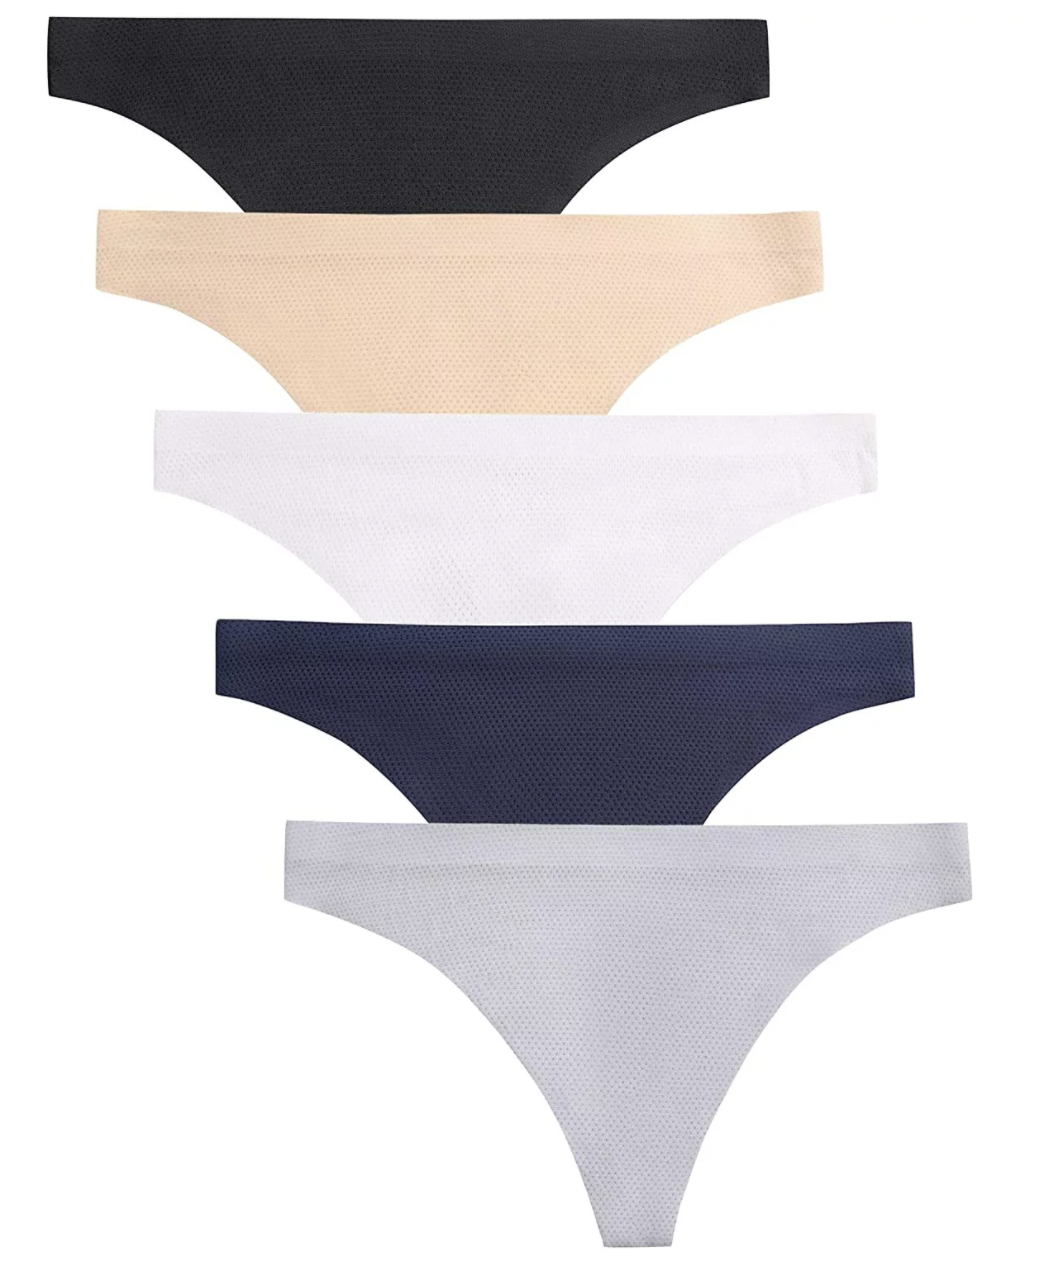 Reviewers Are Loving These Comfy Pairs Of Seamless Underwear